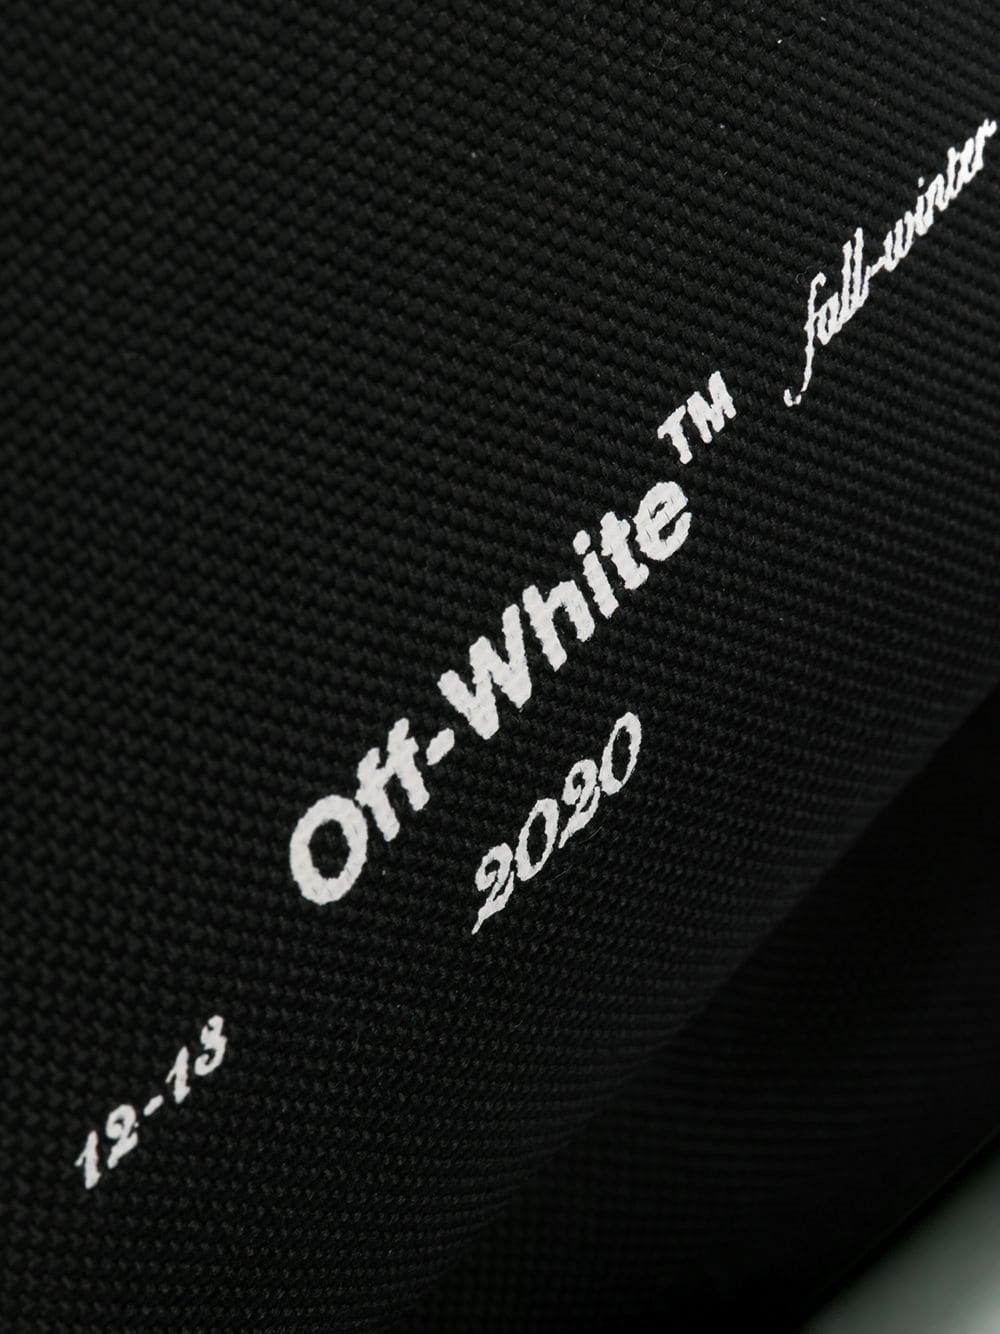 off-white ABSTRACT BACKPACK available on montiboutique.com - 31220